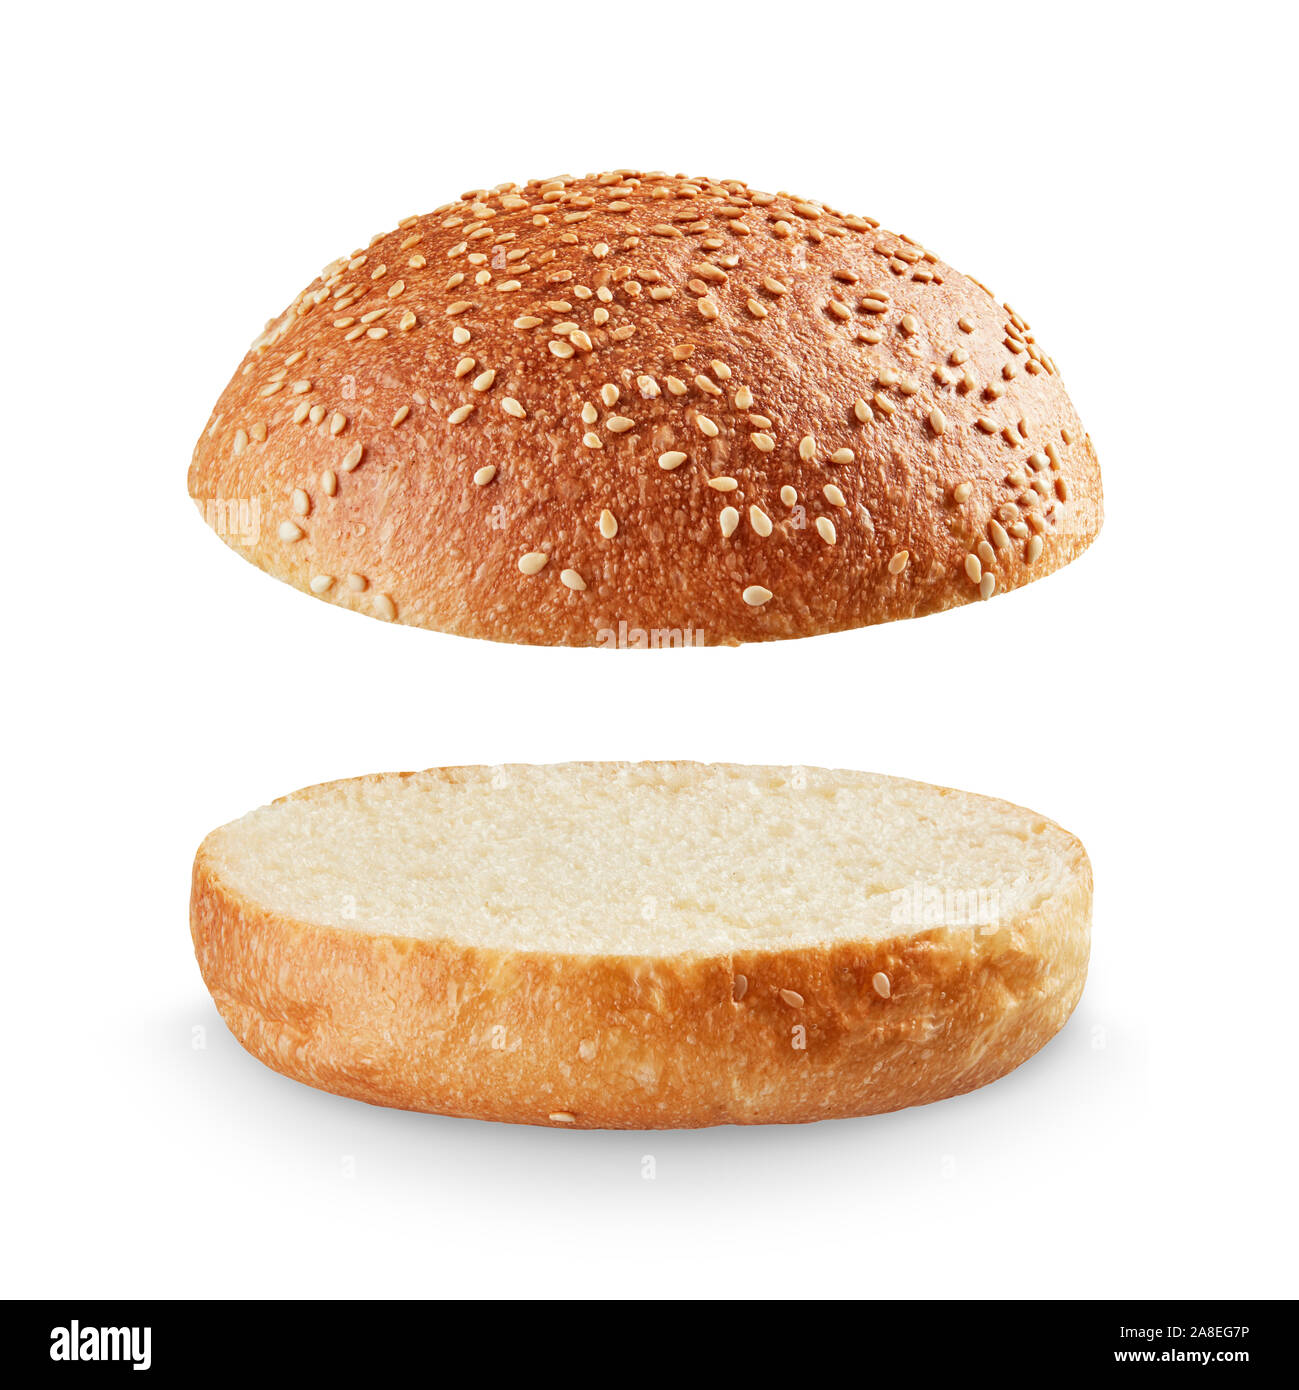 Open and empty burger bread isolated on white background; full depth of field Stock Photo